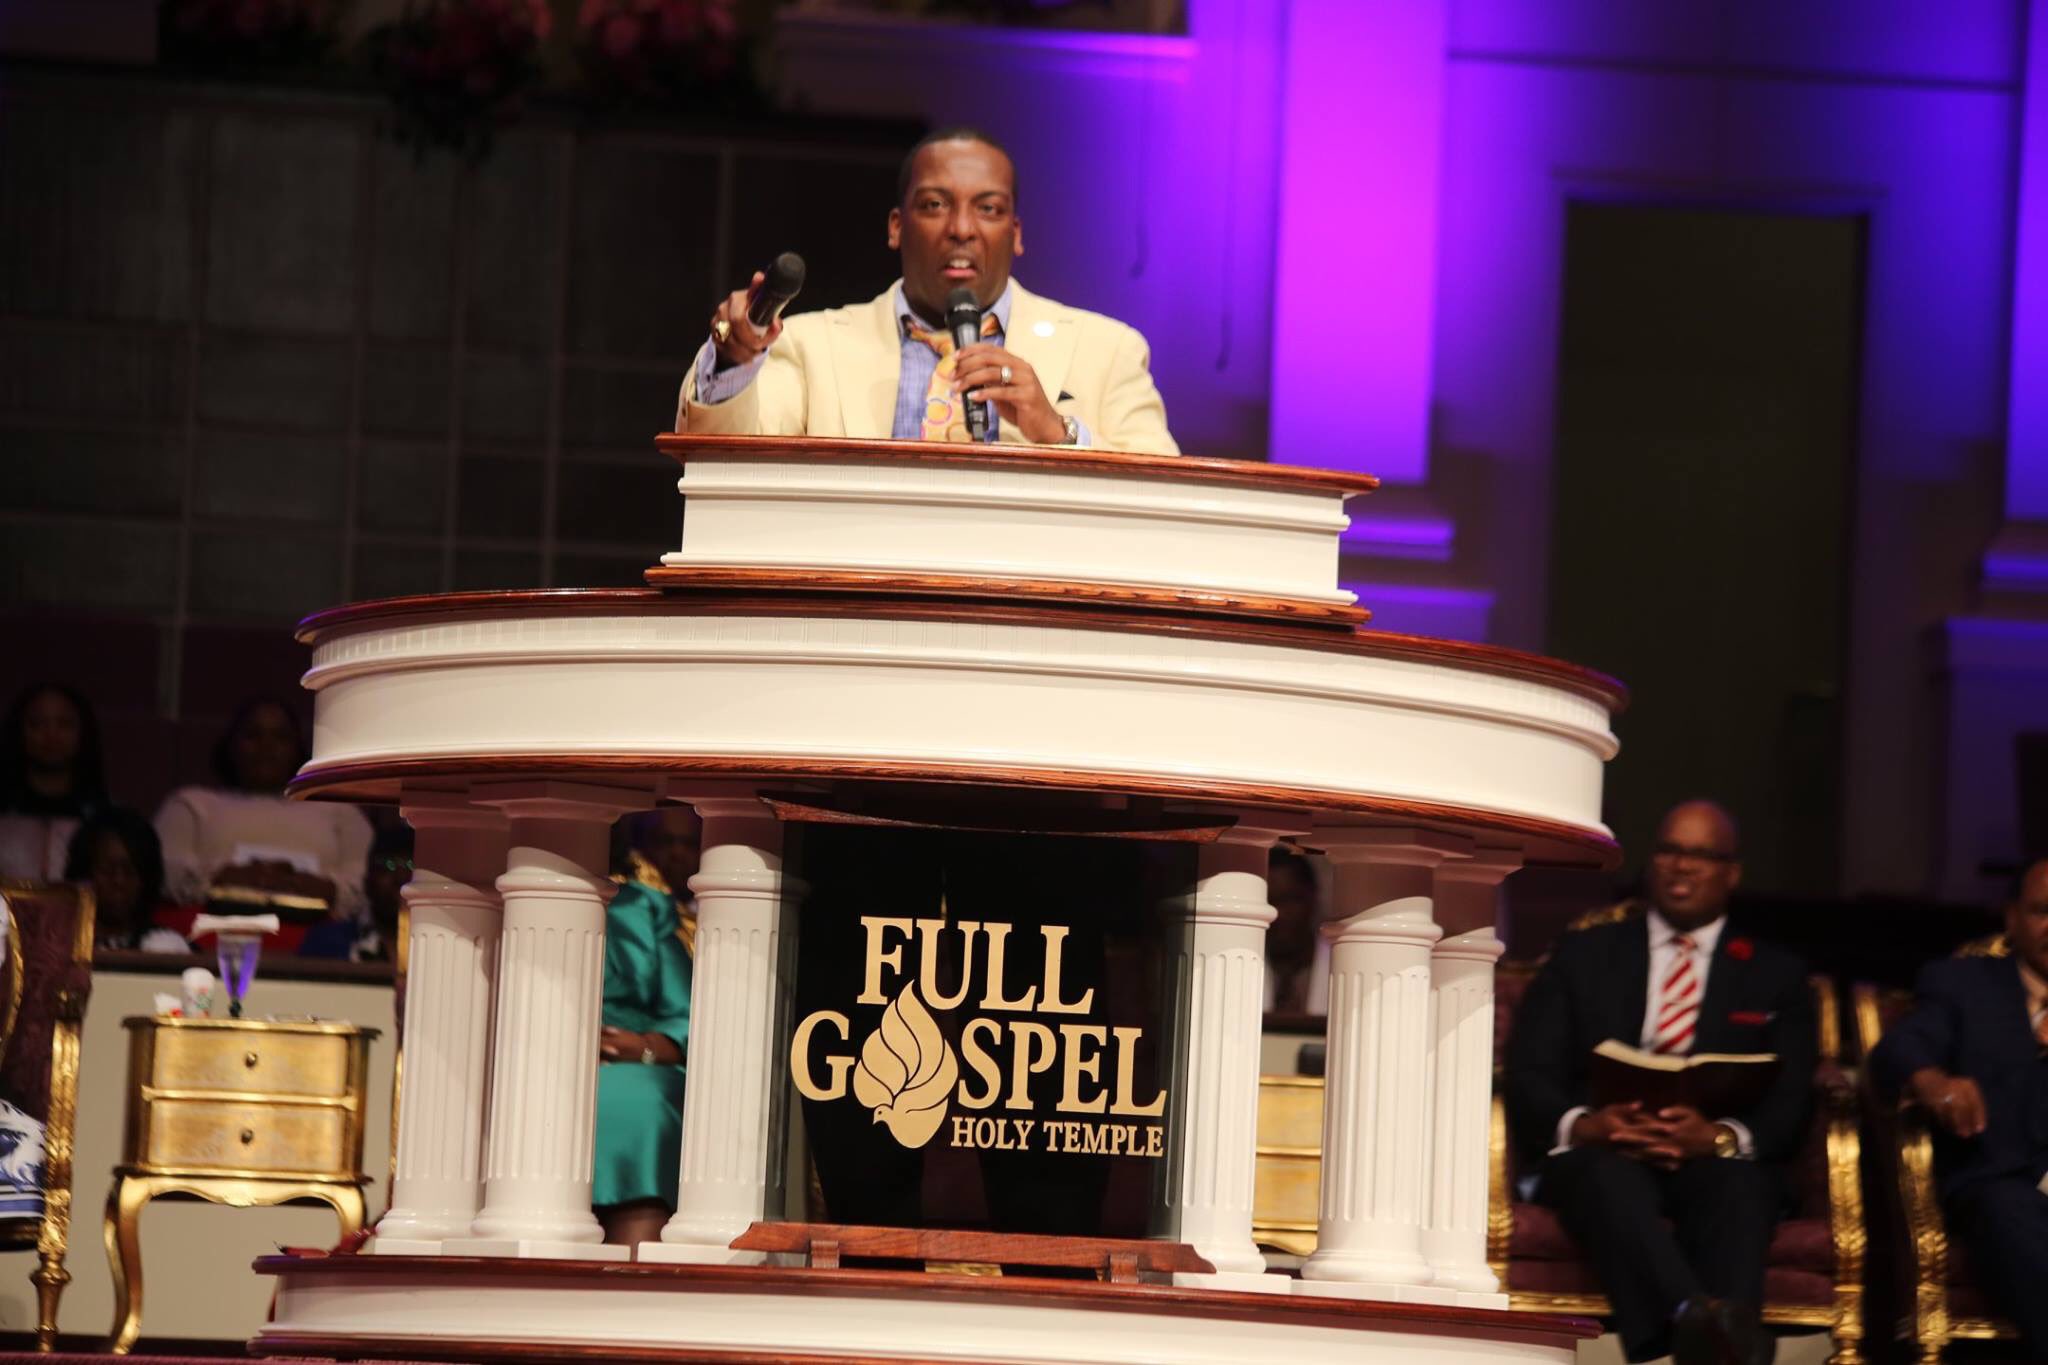 Full Gospel Dallas on Twitter: "Father's Day message by ...